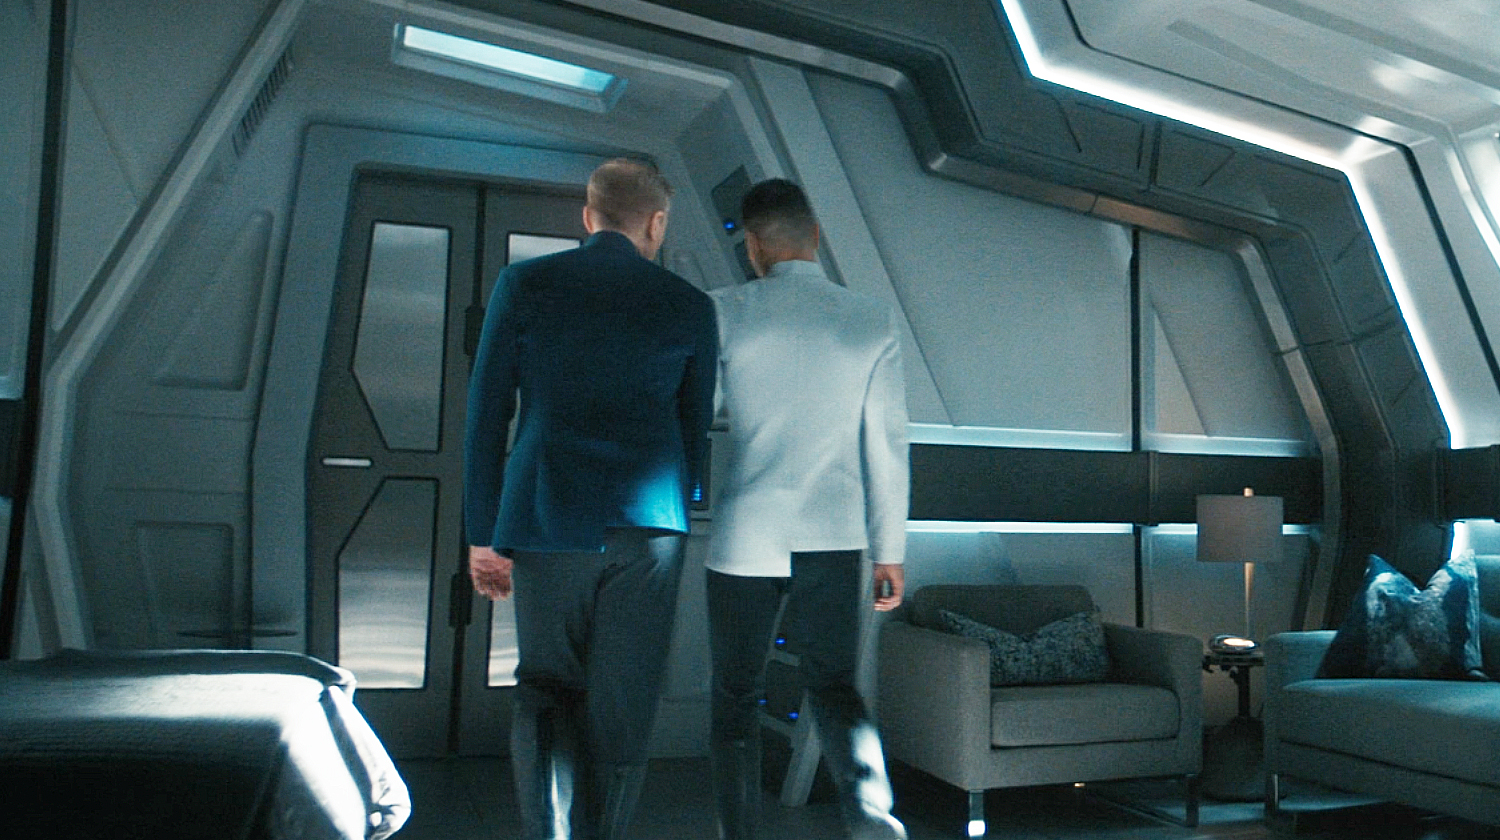 There's an attempt at a heartfelt scene between Stamets and Culber, but sadly, it feels a little contrived